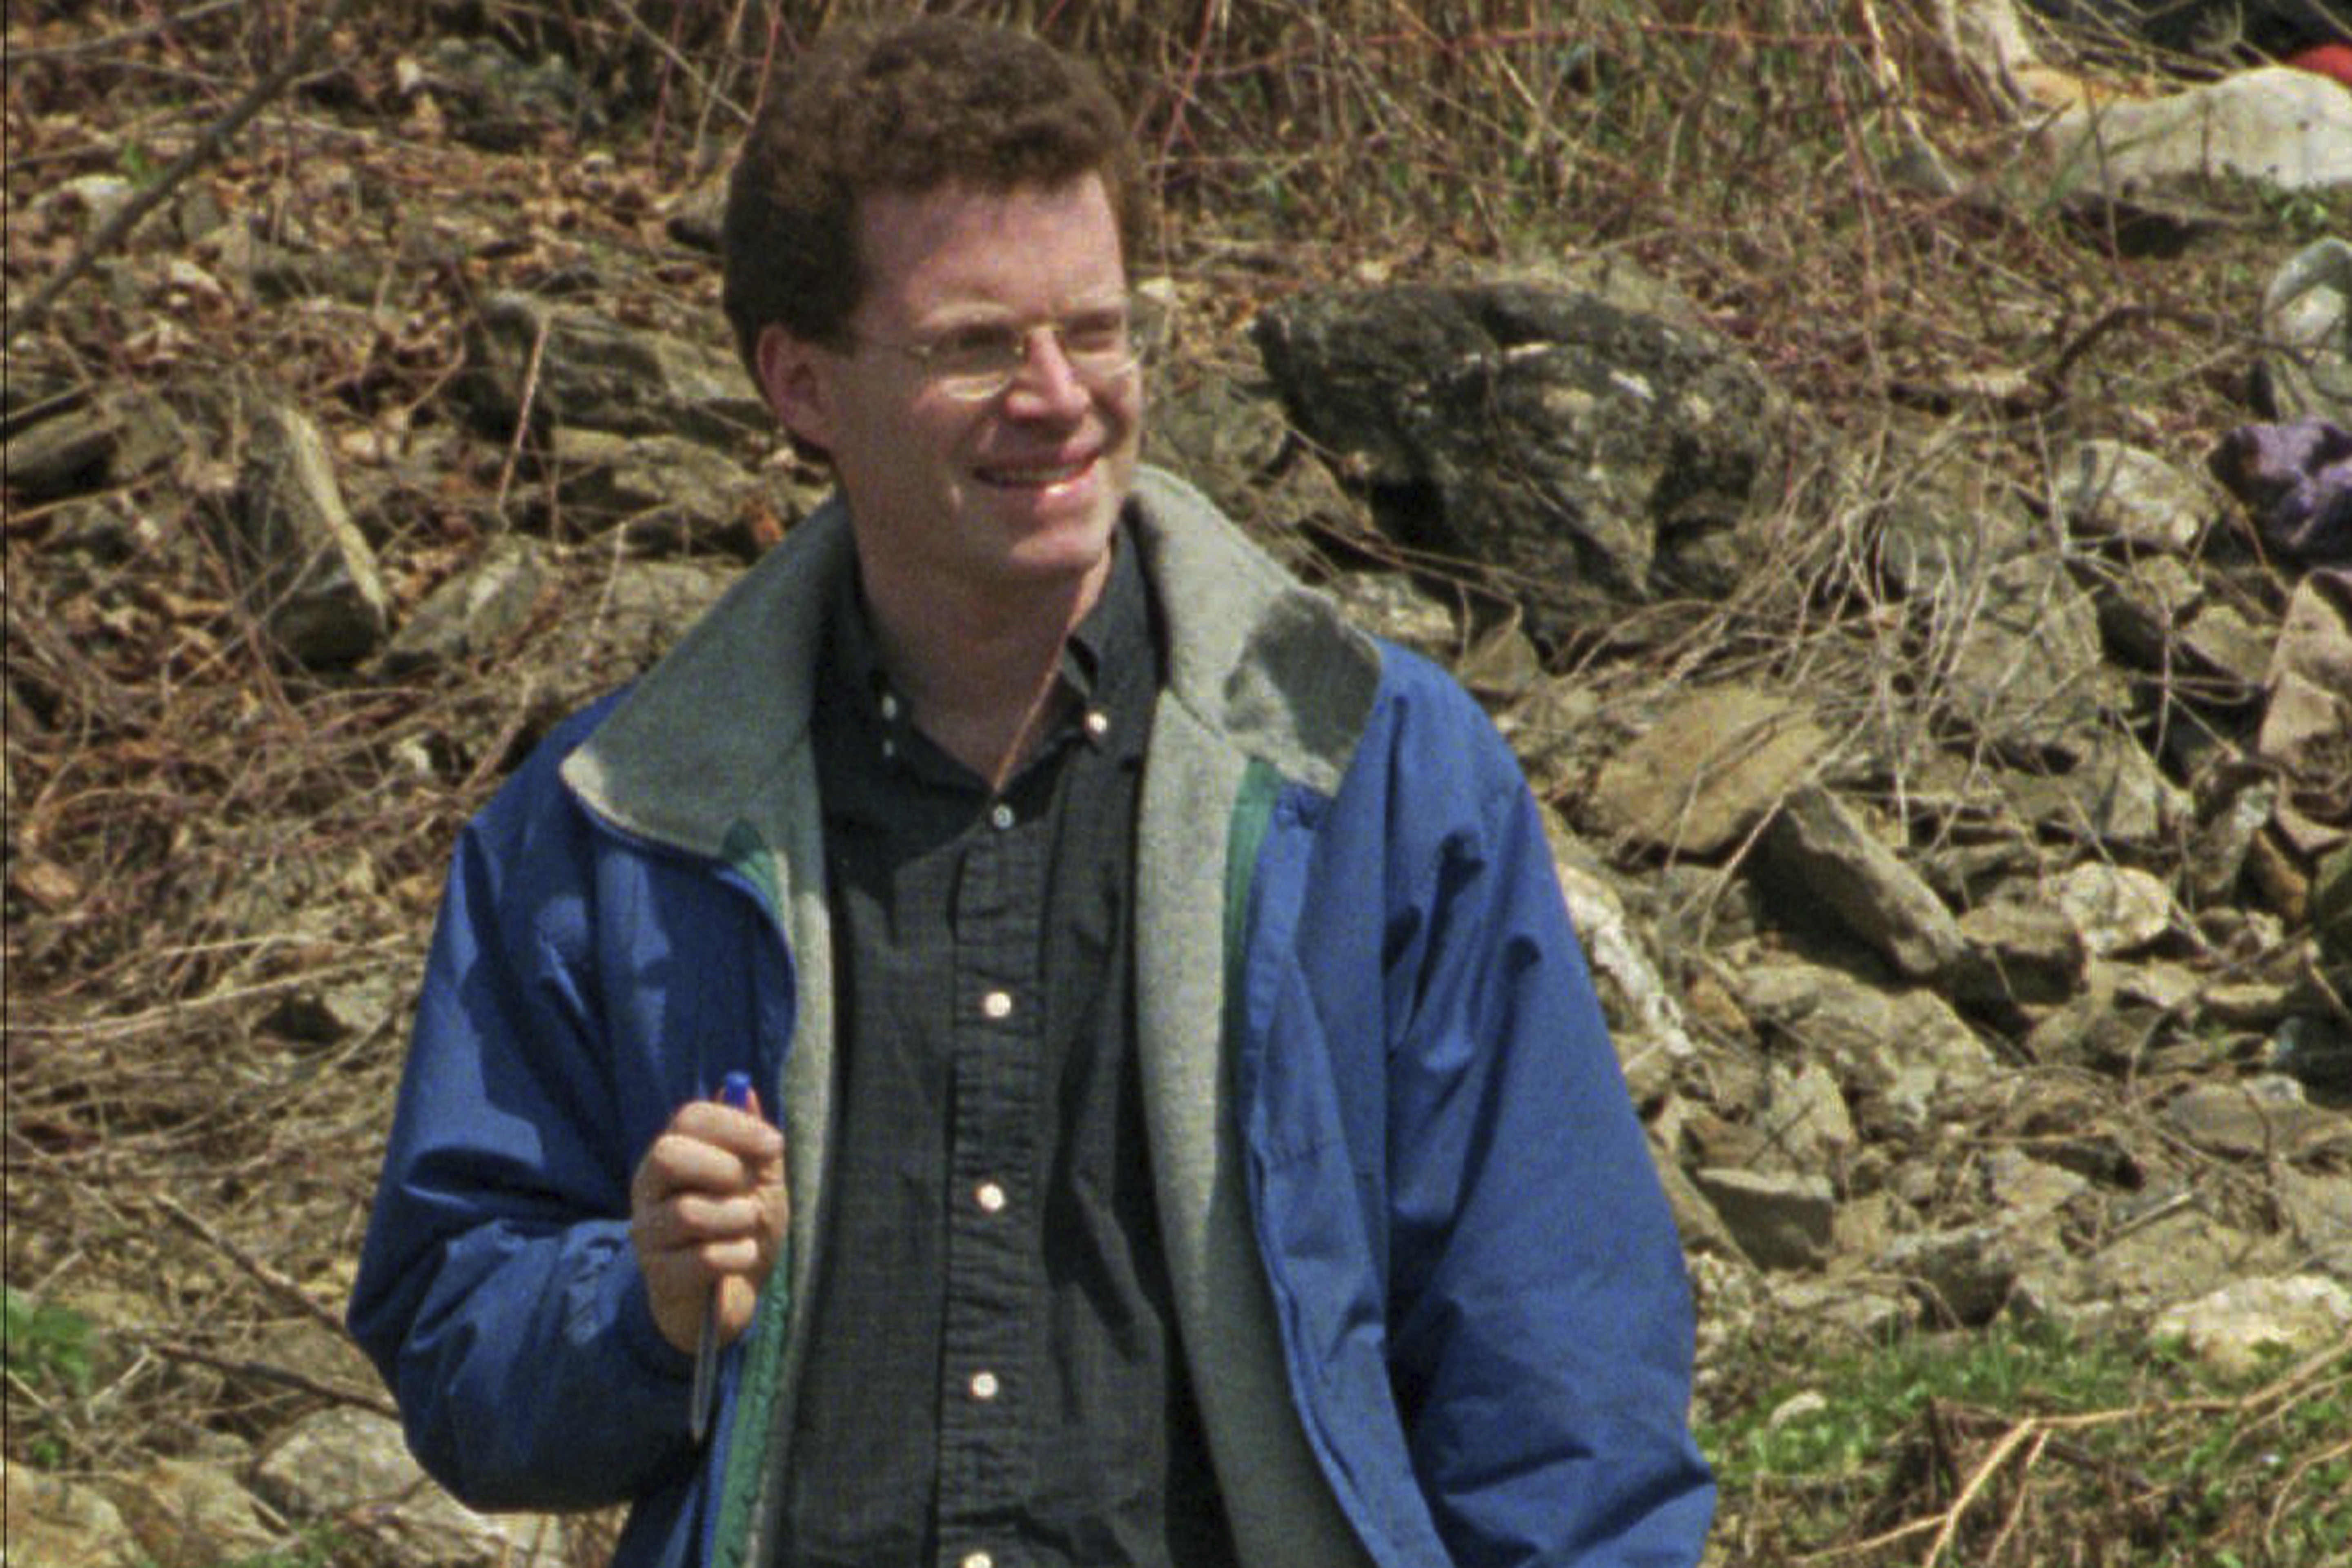 FILE - This April 9, 1996, file photo shows David Rohde, then of The Christian Science Monitor, at a mass grave site in Kravice, Bosnia. Rohde, reporting for the New York Times, and two other men were kidnapped at gunpoint in Afghanistan in 2008. U.S. authorities announced Wednesday, Oct. 28, 2020, that an Afghan man, Haji Najibullah, has been brought to the United States to face charges in the kidnapping. The victims were not identified, but the description matched the kidnapping of Rohde and Afghan journalist Tahir Ludin. Photo: AP